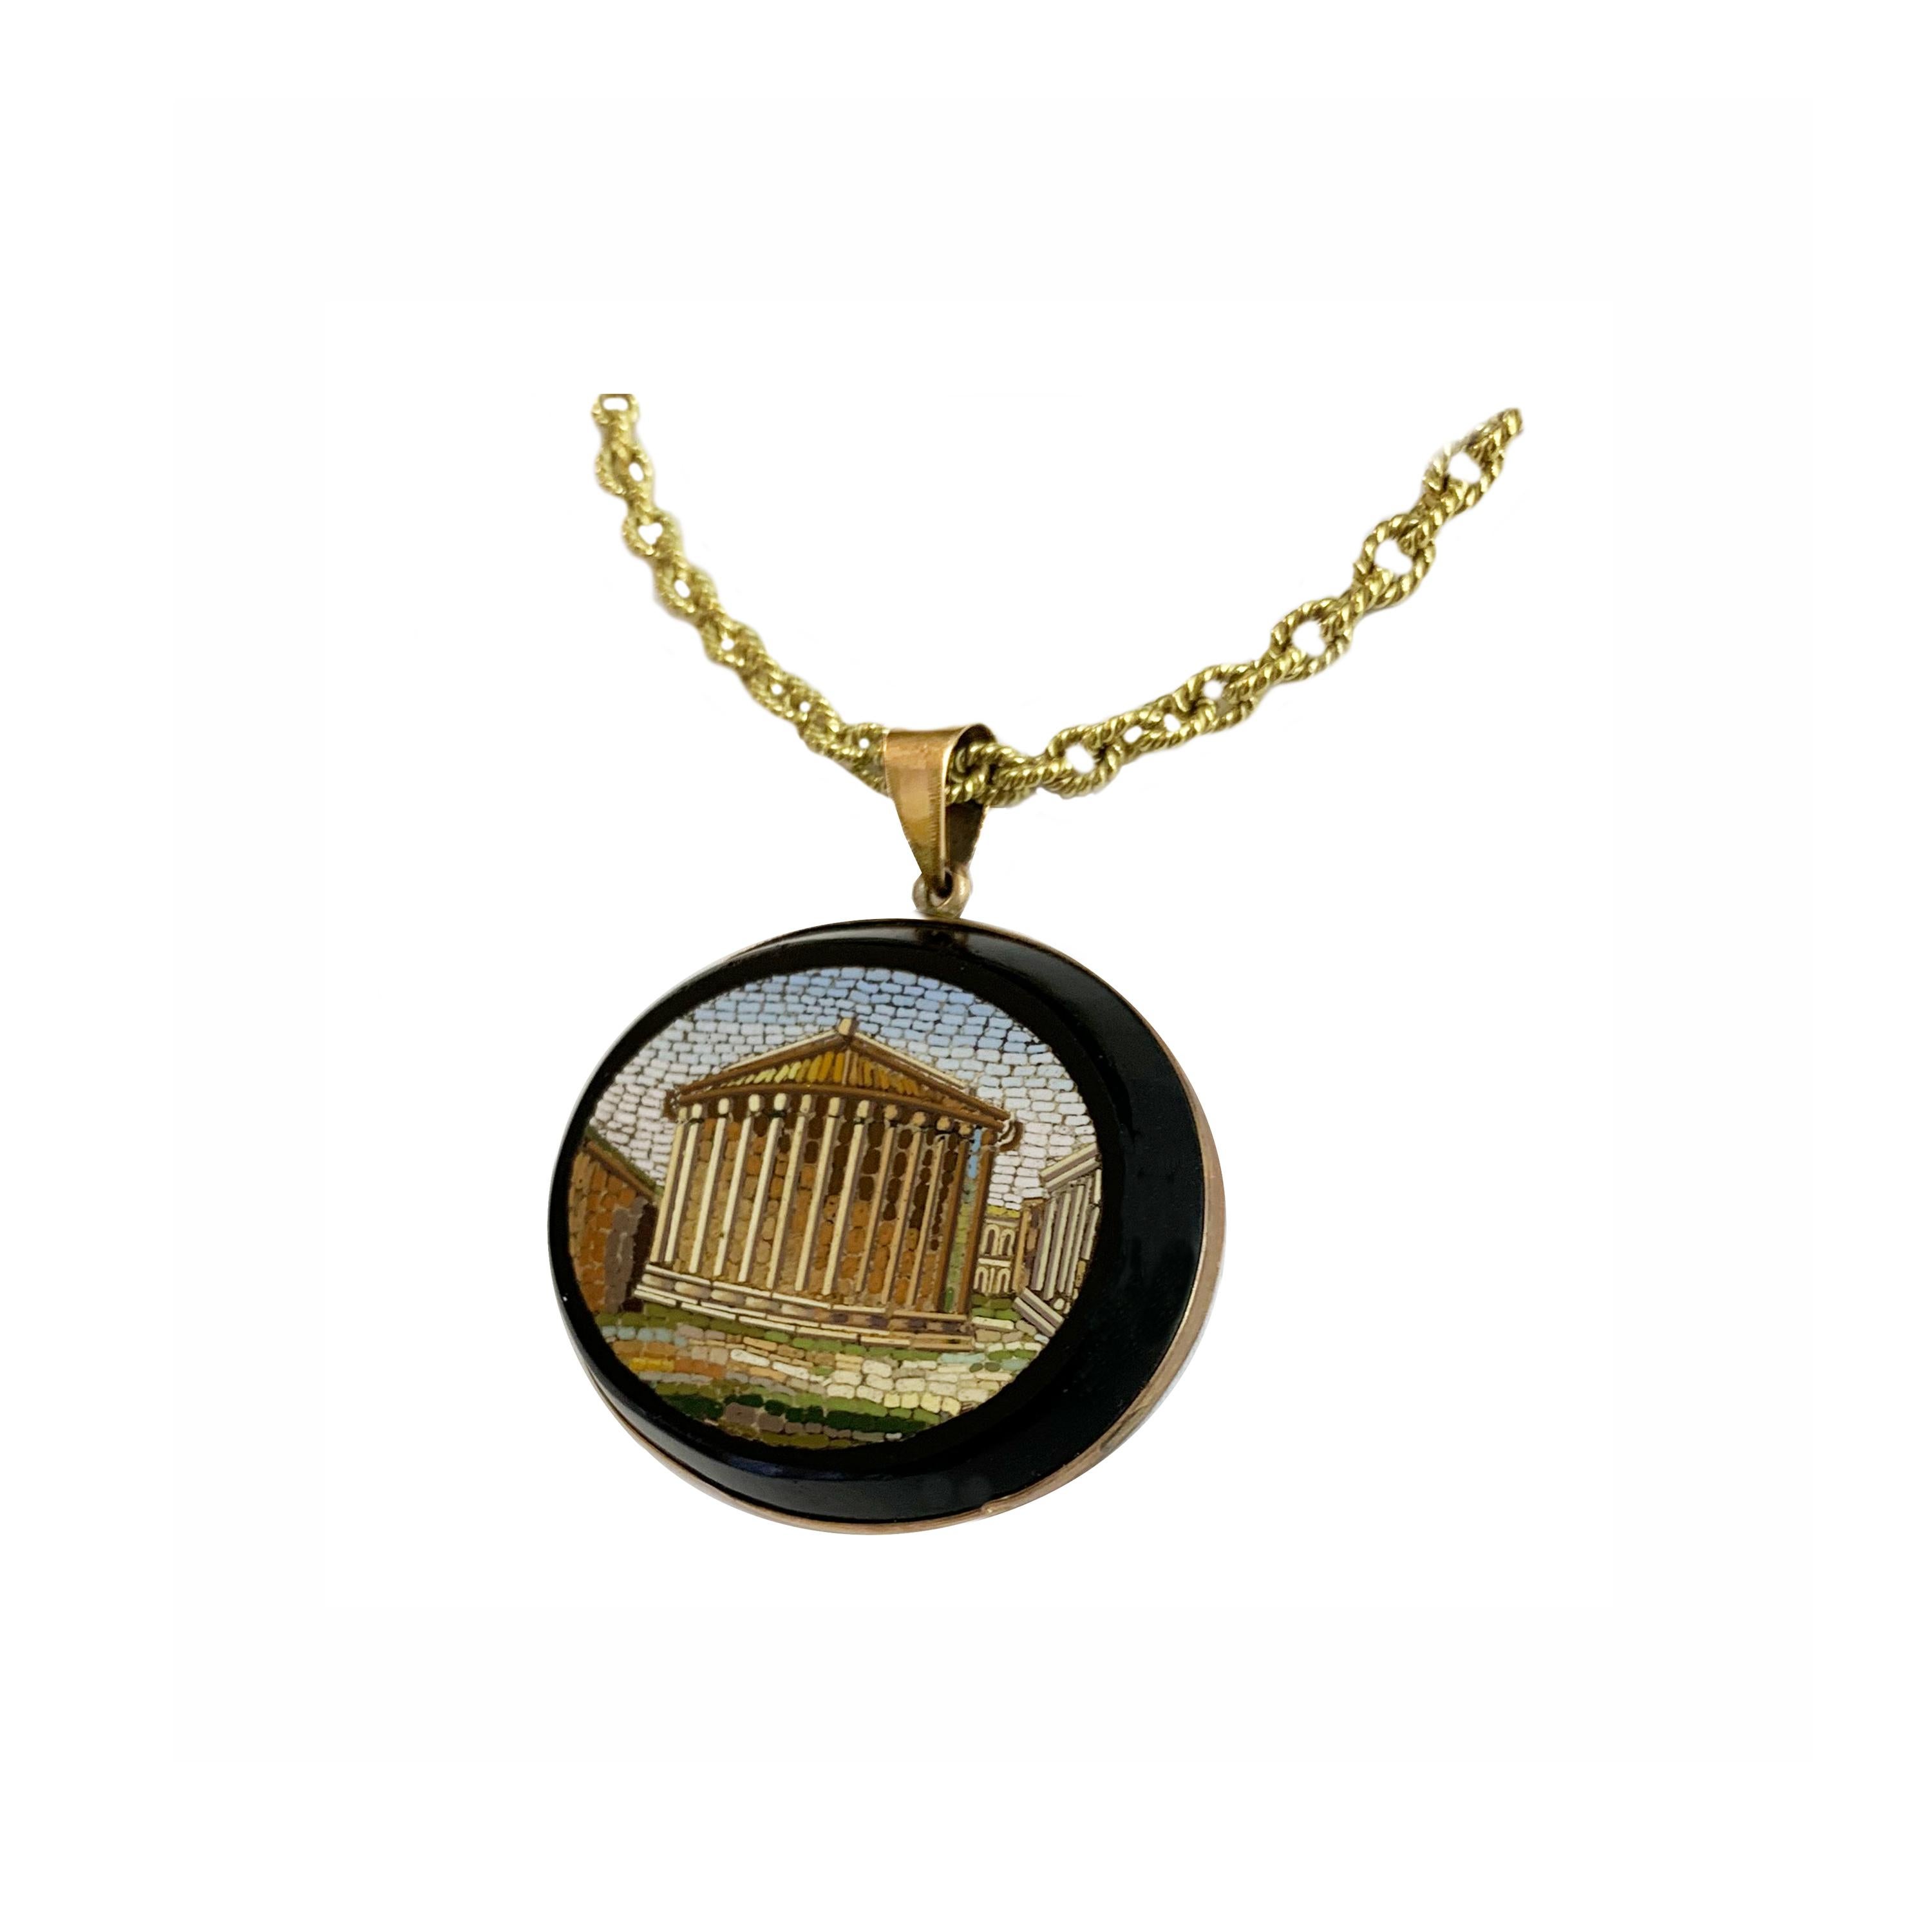 Oval micromosaic pendant, representing a view of the so-called Temple of Vesta in  Rome, set on black marble.
Rome 1850's Vatican Mosaic Workshop
The 